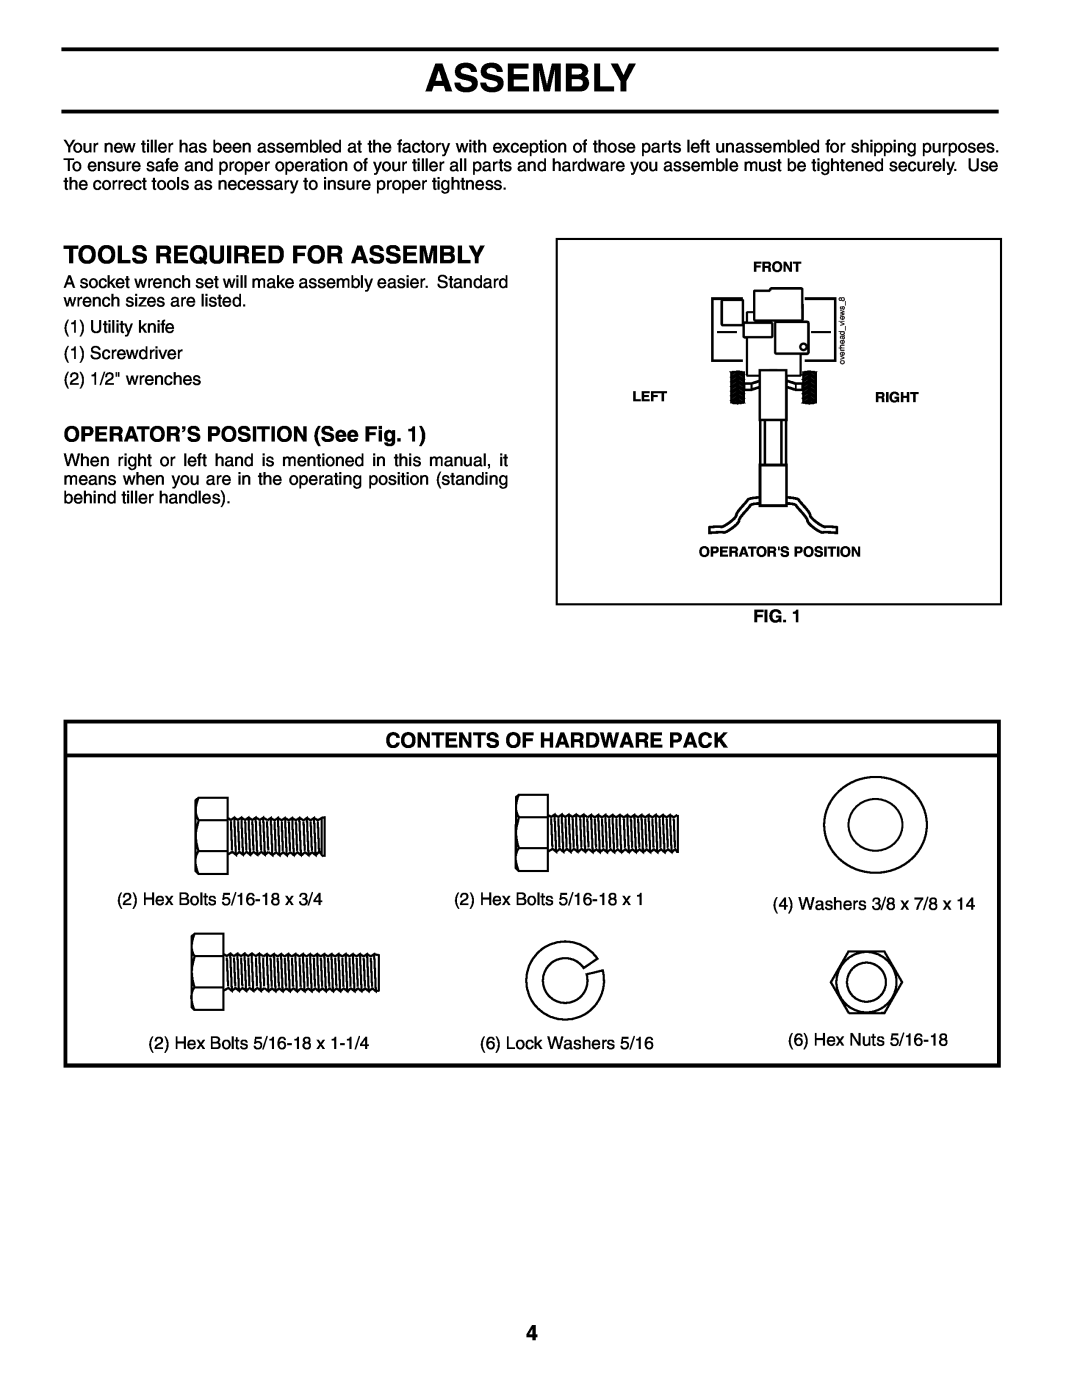 Poulan HDF550N owner manual Tools Required For Assembly, OPERATOR’S POSITION See Fig, Contents Of Hardware Pack 